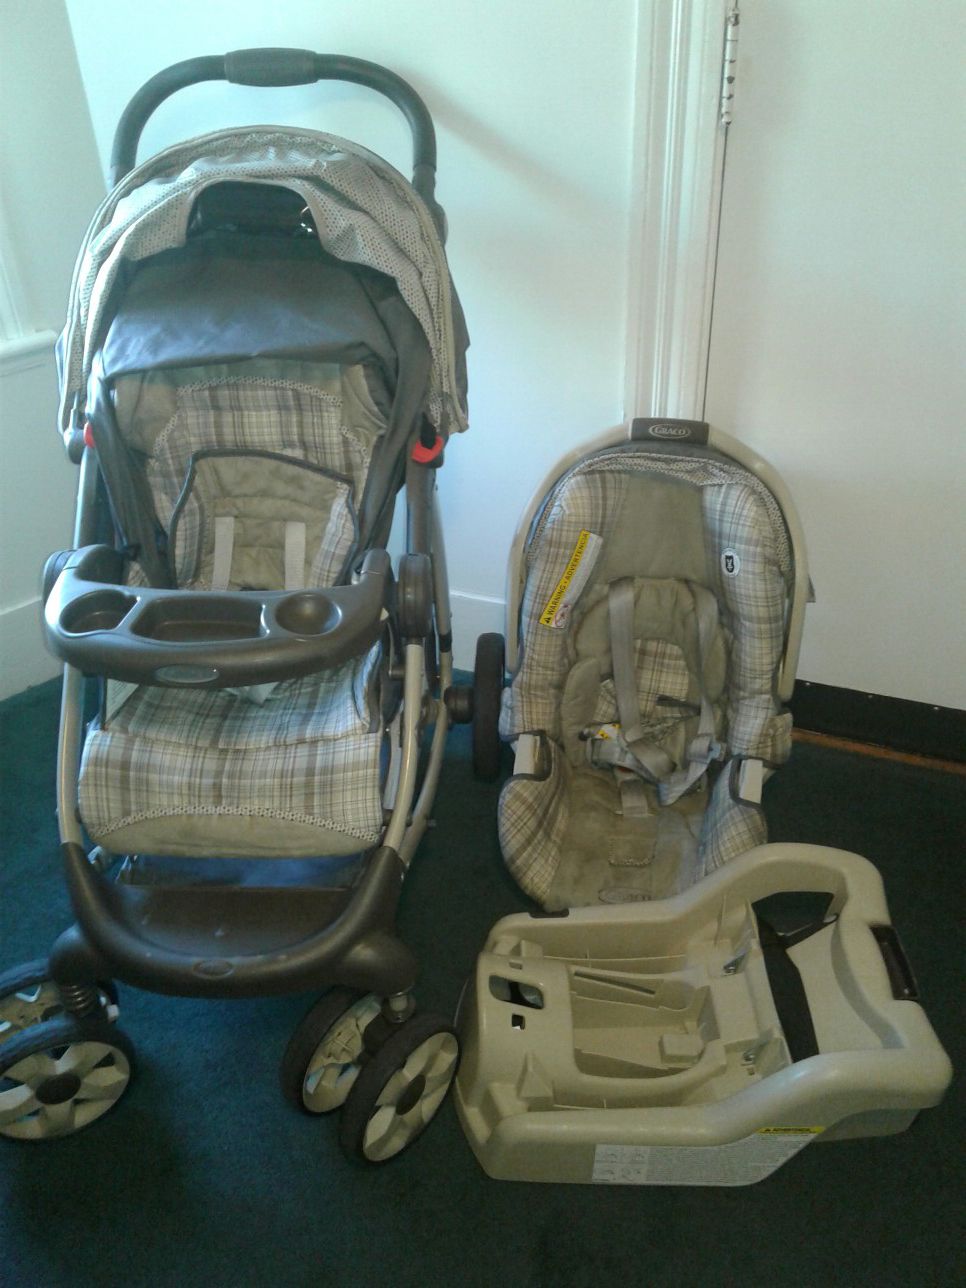 Graco stroller with the car seat